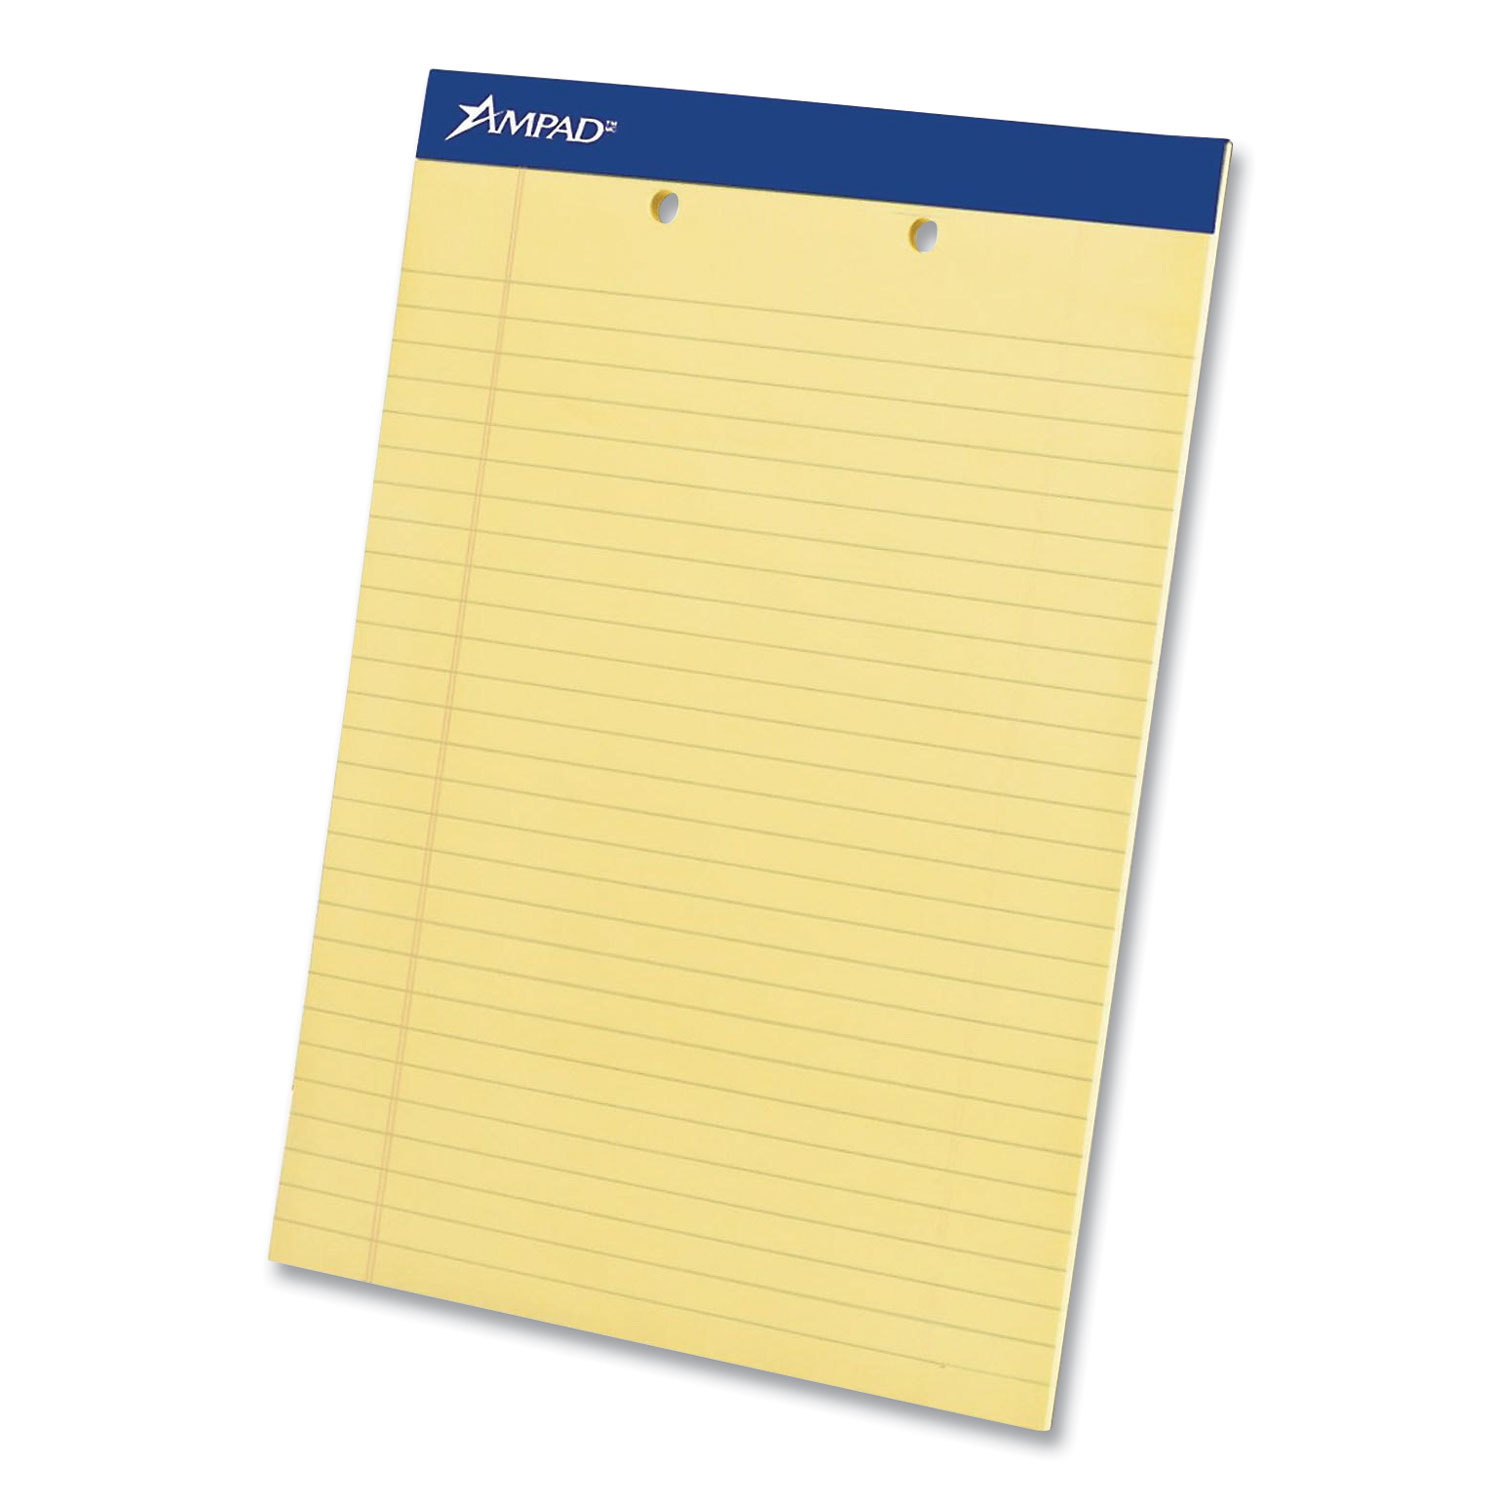  Ampad 20-224 Perforated Writing Pads,Wide/Legal Rule, Canary Sheets, 2-Hole Top Punched, 8.5 x 11.75, 50 Sheets, Dozen (AMP353666) 